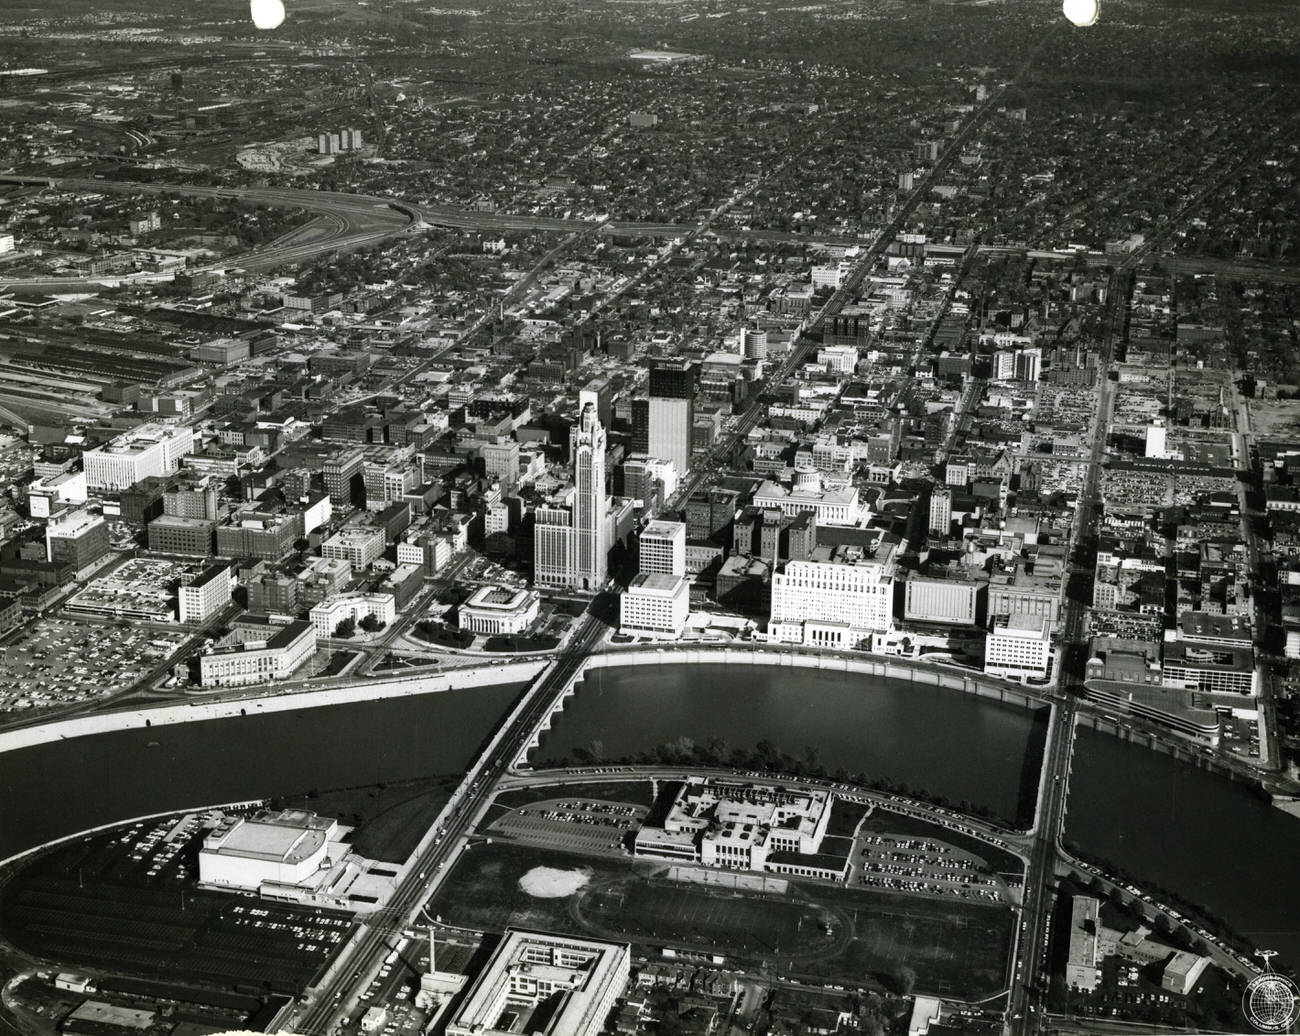 Civic Center looking east across Scioto River with Broad St Bridge in center, featuring Veterans Administration building and Veterans Memorial Auditorium, October 27, 1965.